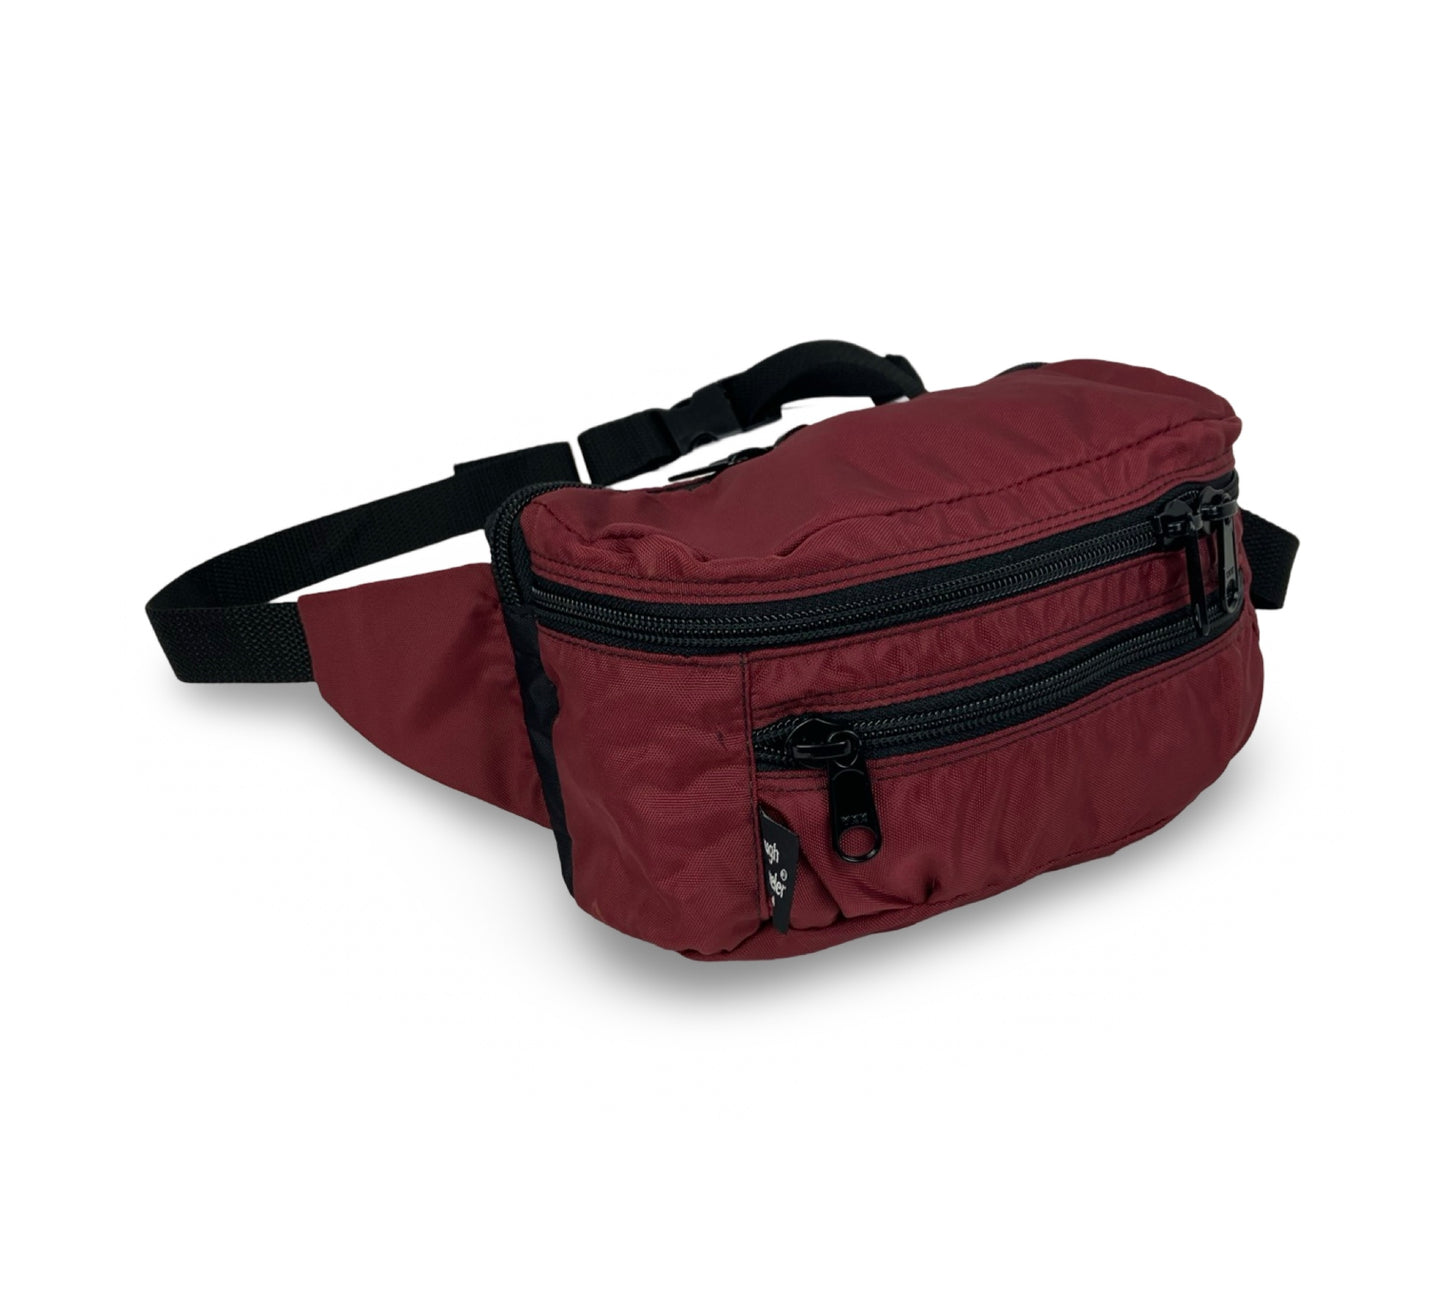 HIP PACK DELUXE Cross-Body & Fanny Packs, by Tough Traveler. Made in USA since 1970